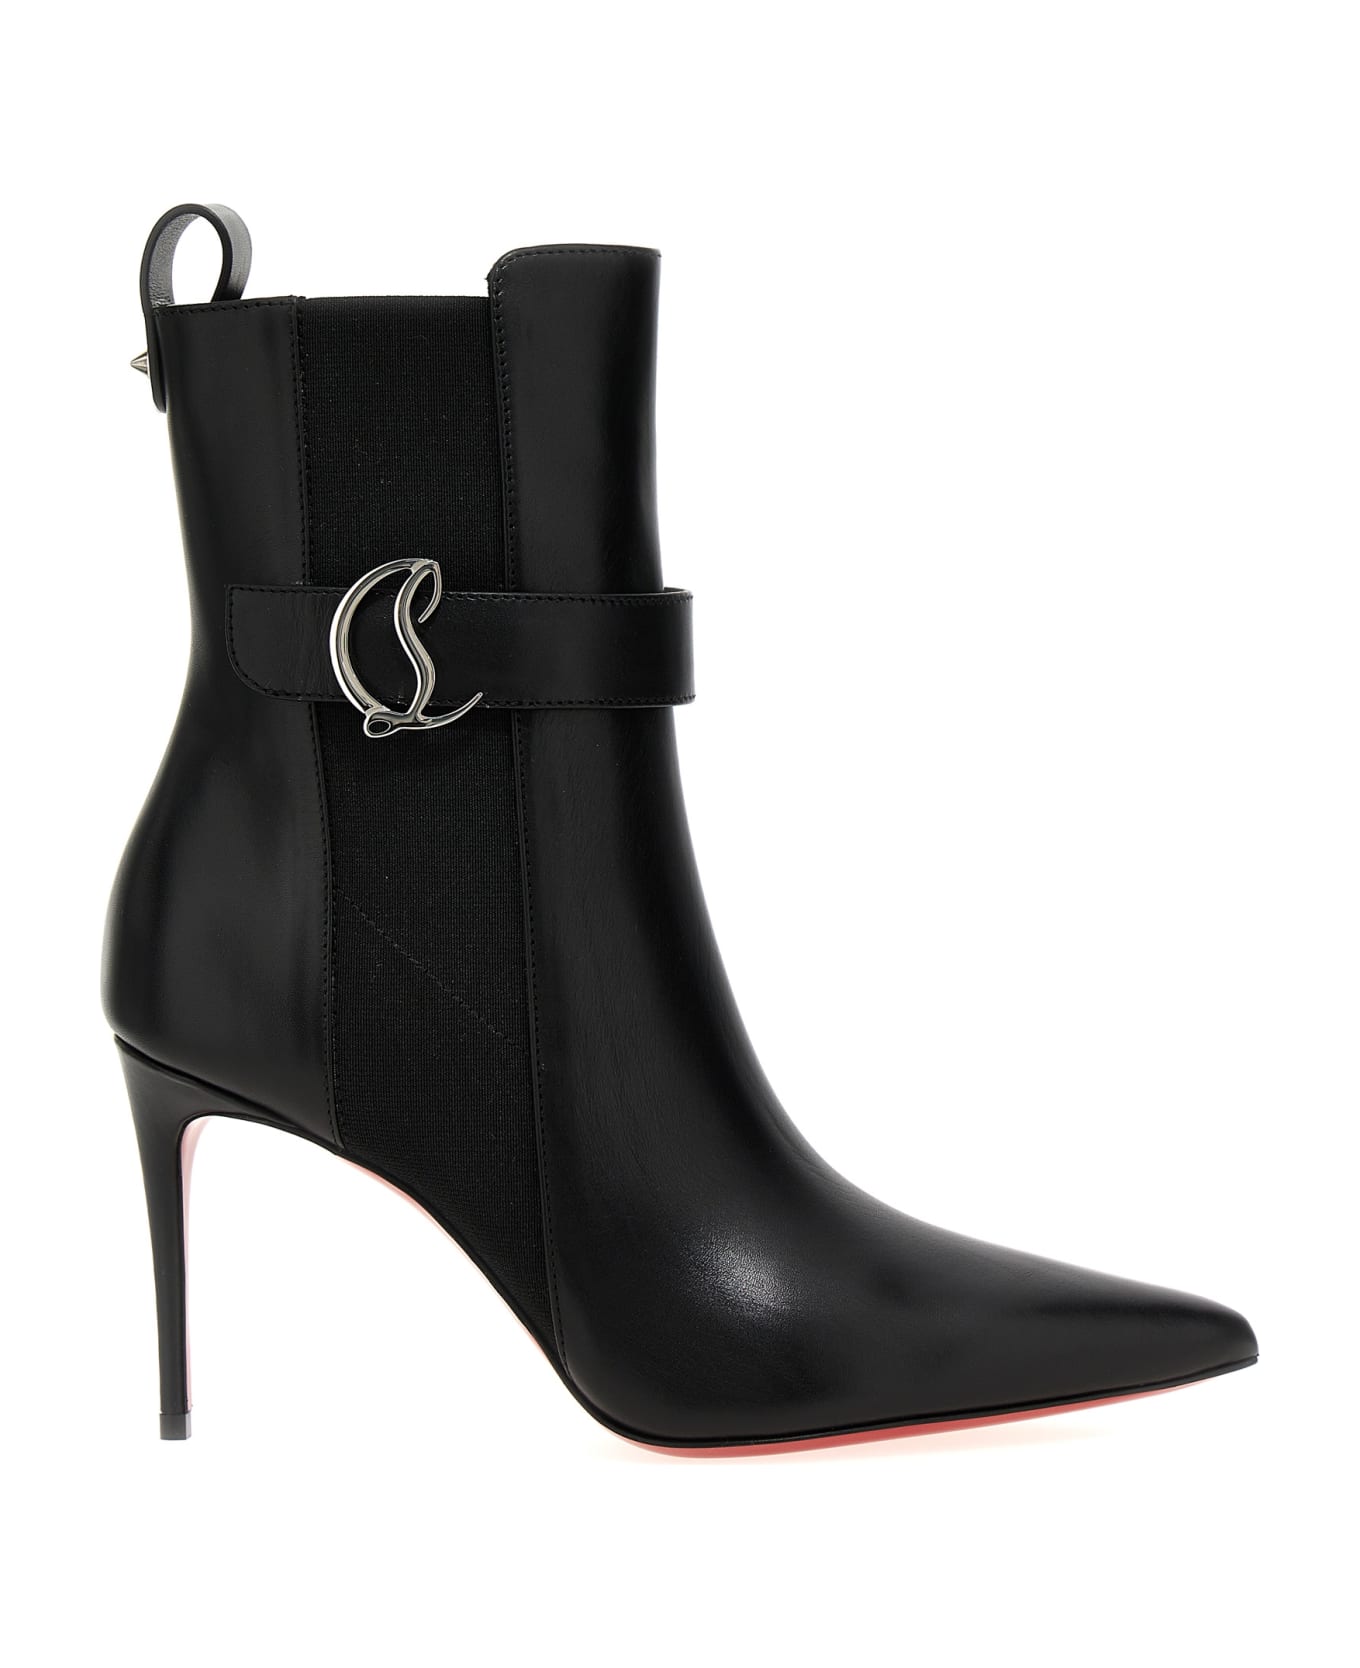 Christian Louboutin 'so Cl' Ankle Boots - Black